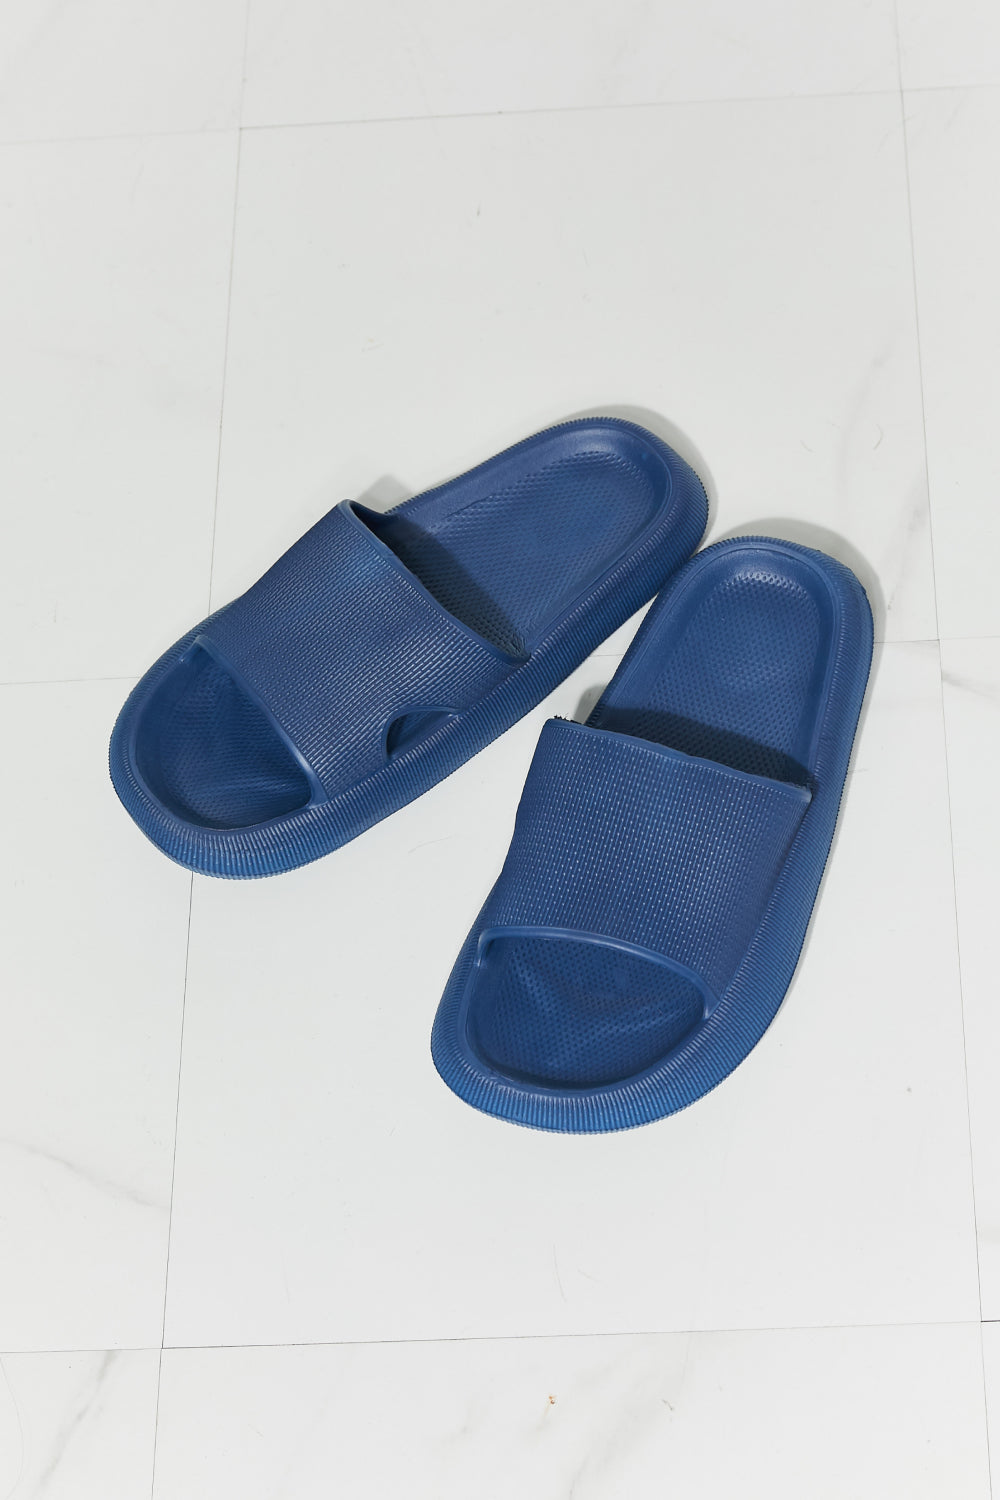 Arms Around Me Open Toe Slide in Navy - Copper + Rose